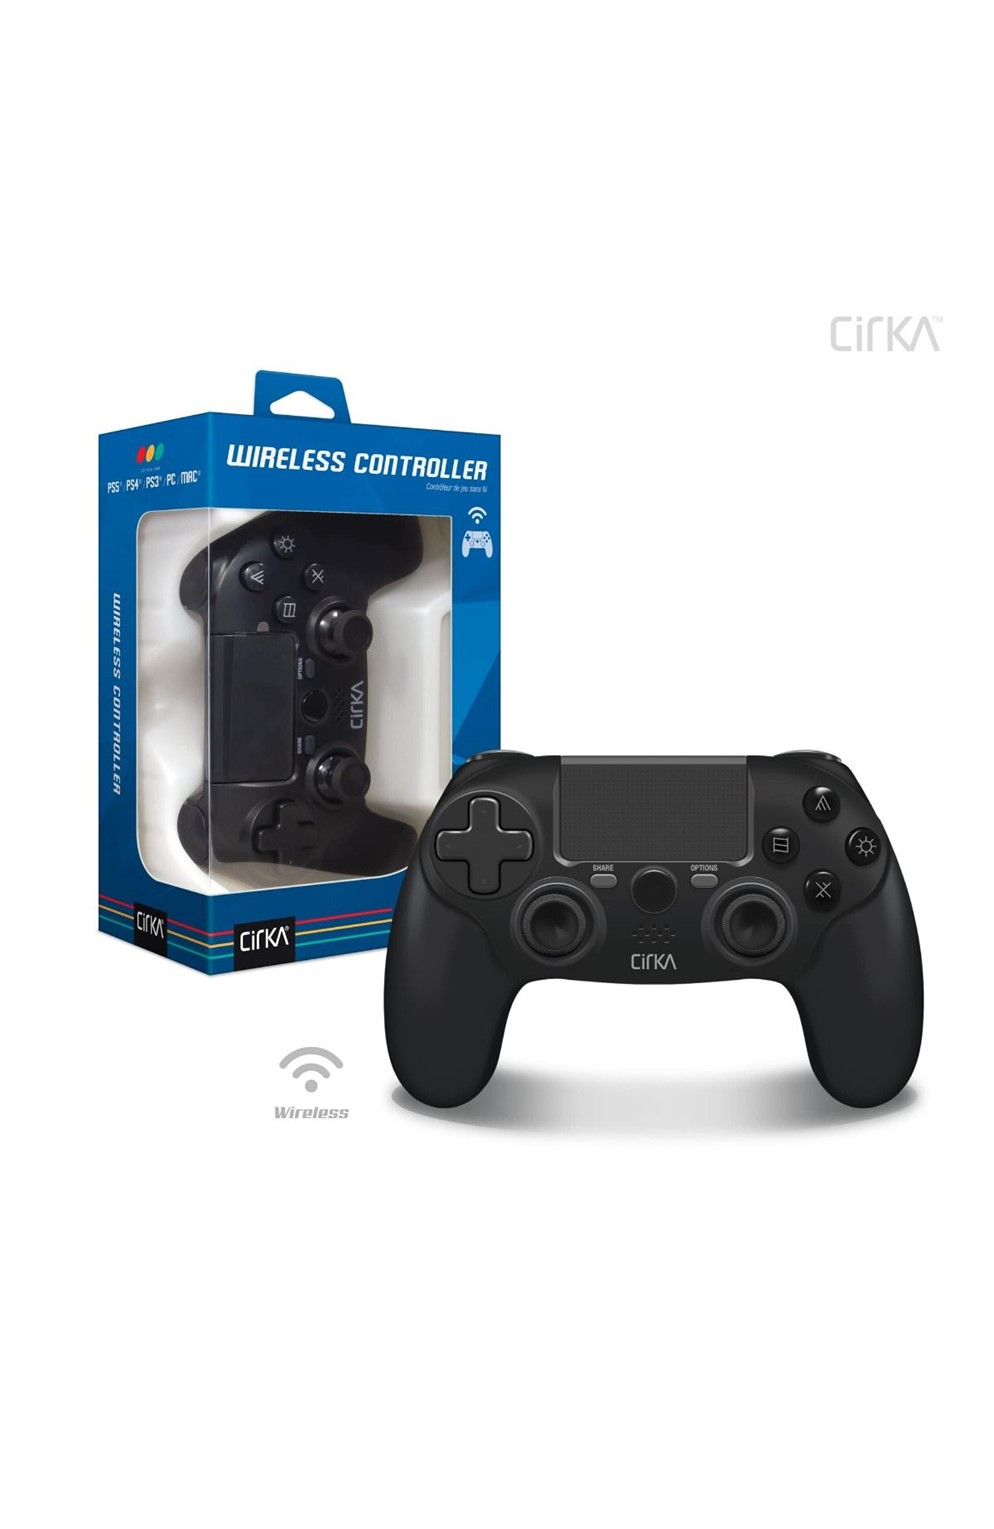 Cirka Nuforce Wireless Game Controller For Ps4 Playstation 4